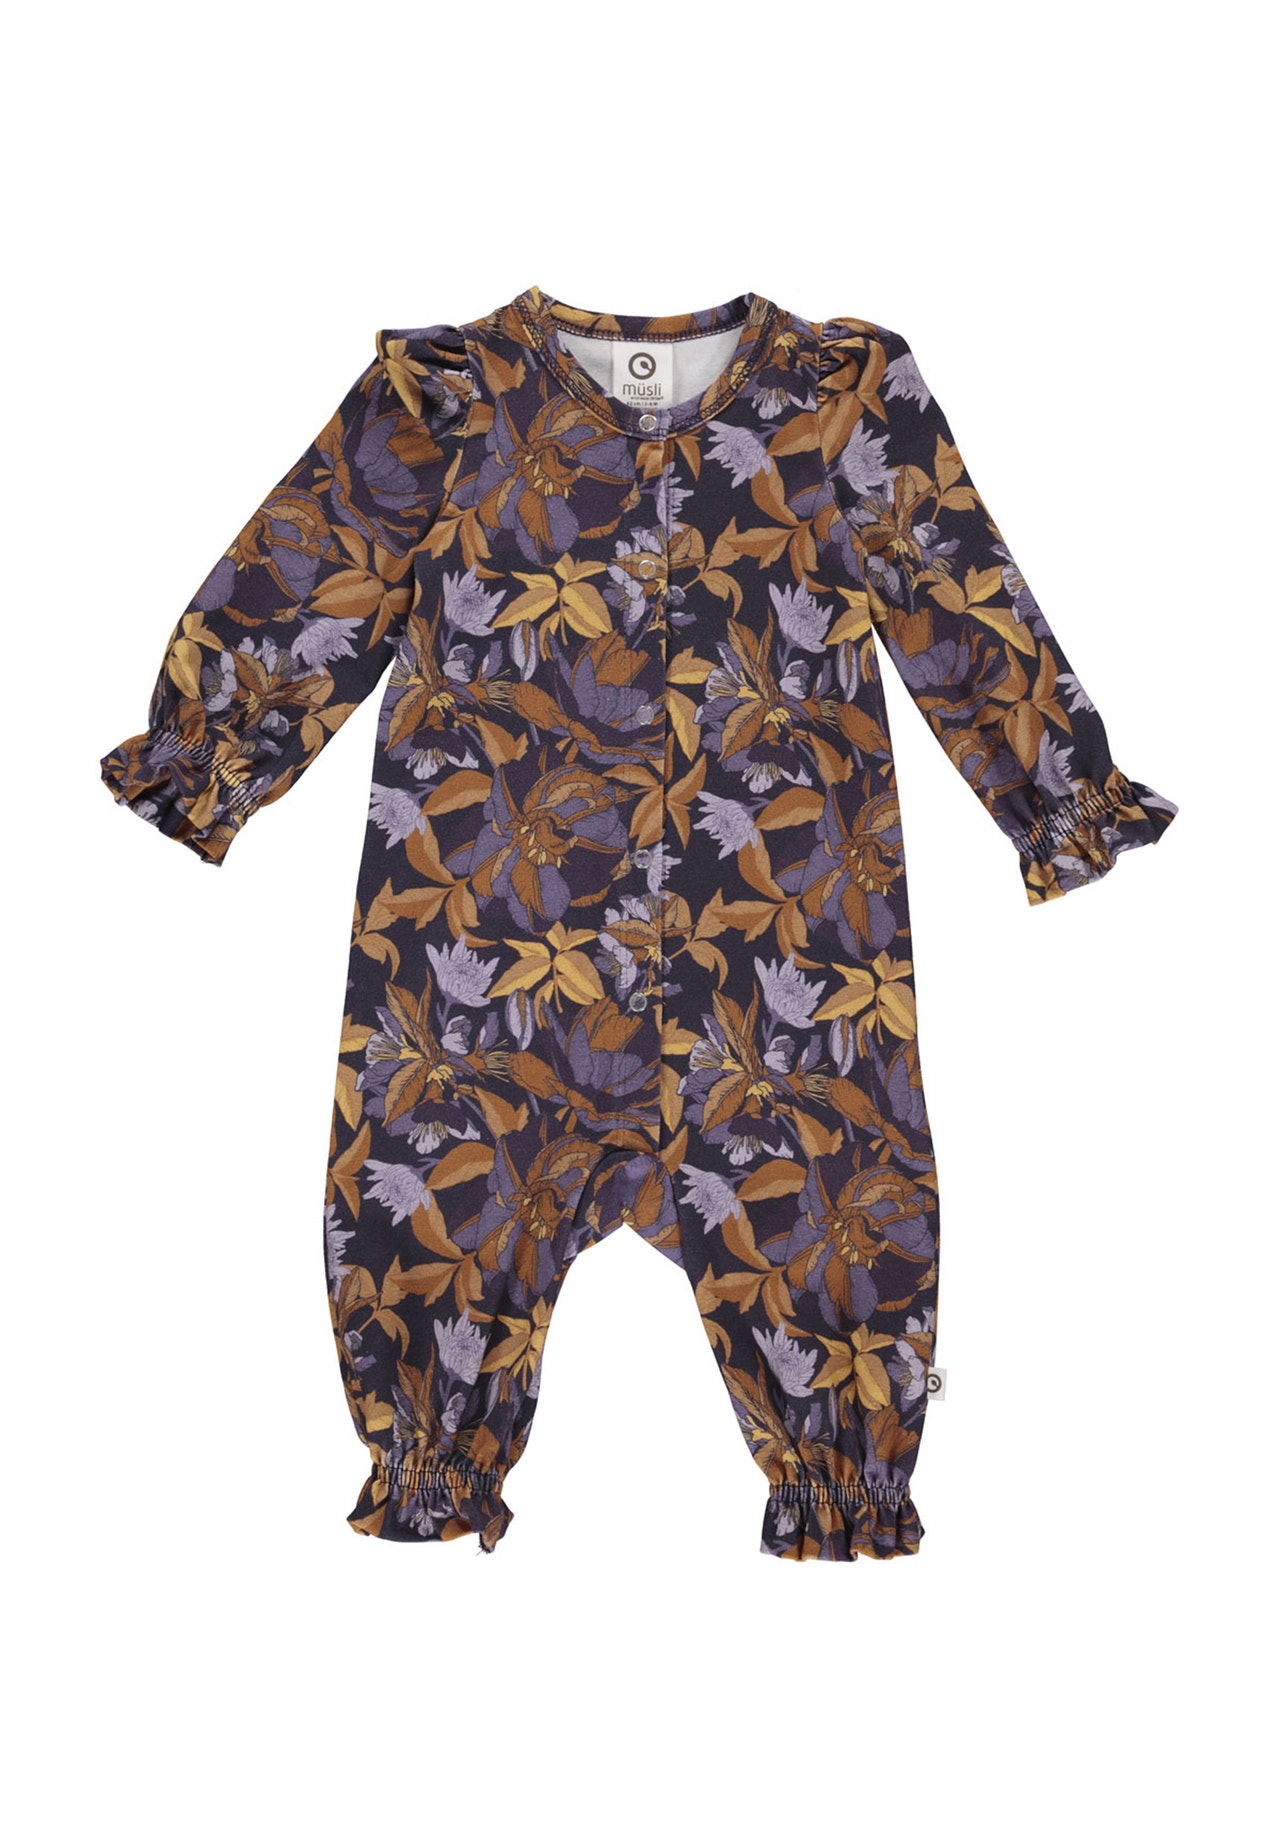 MAMA.LICIOUS Baby one-piece suit -Lilac fog - 1584059300